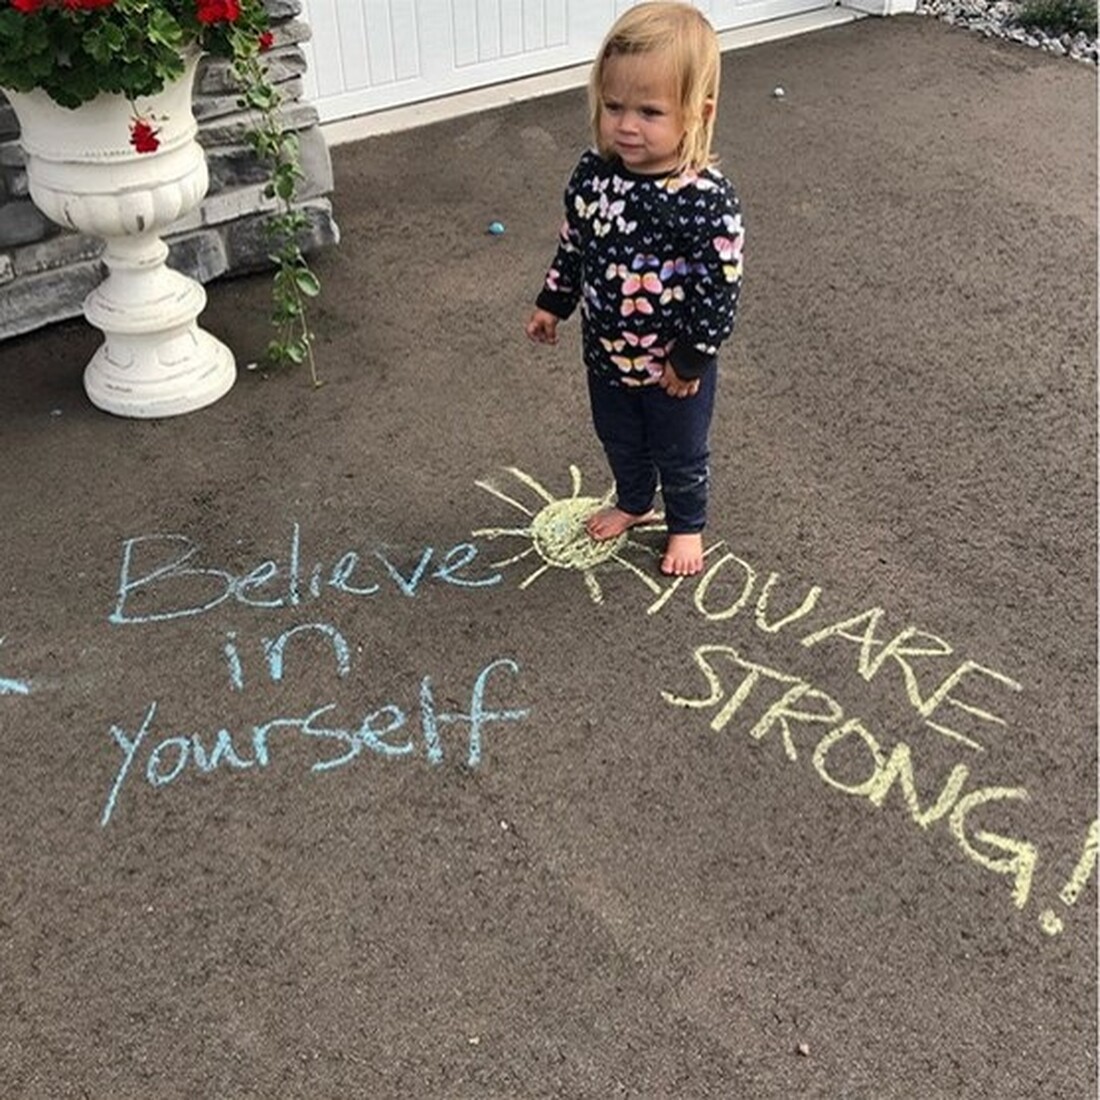 Little girl standing by chalk words Believe in yourself and You are strong!